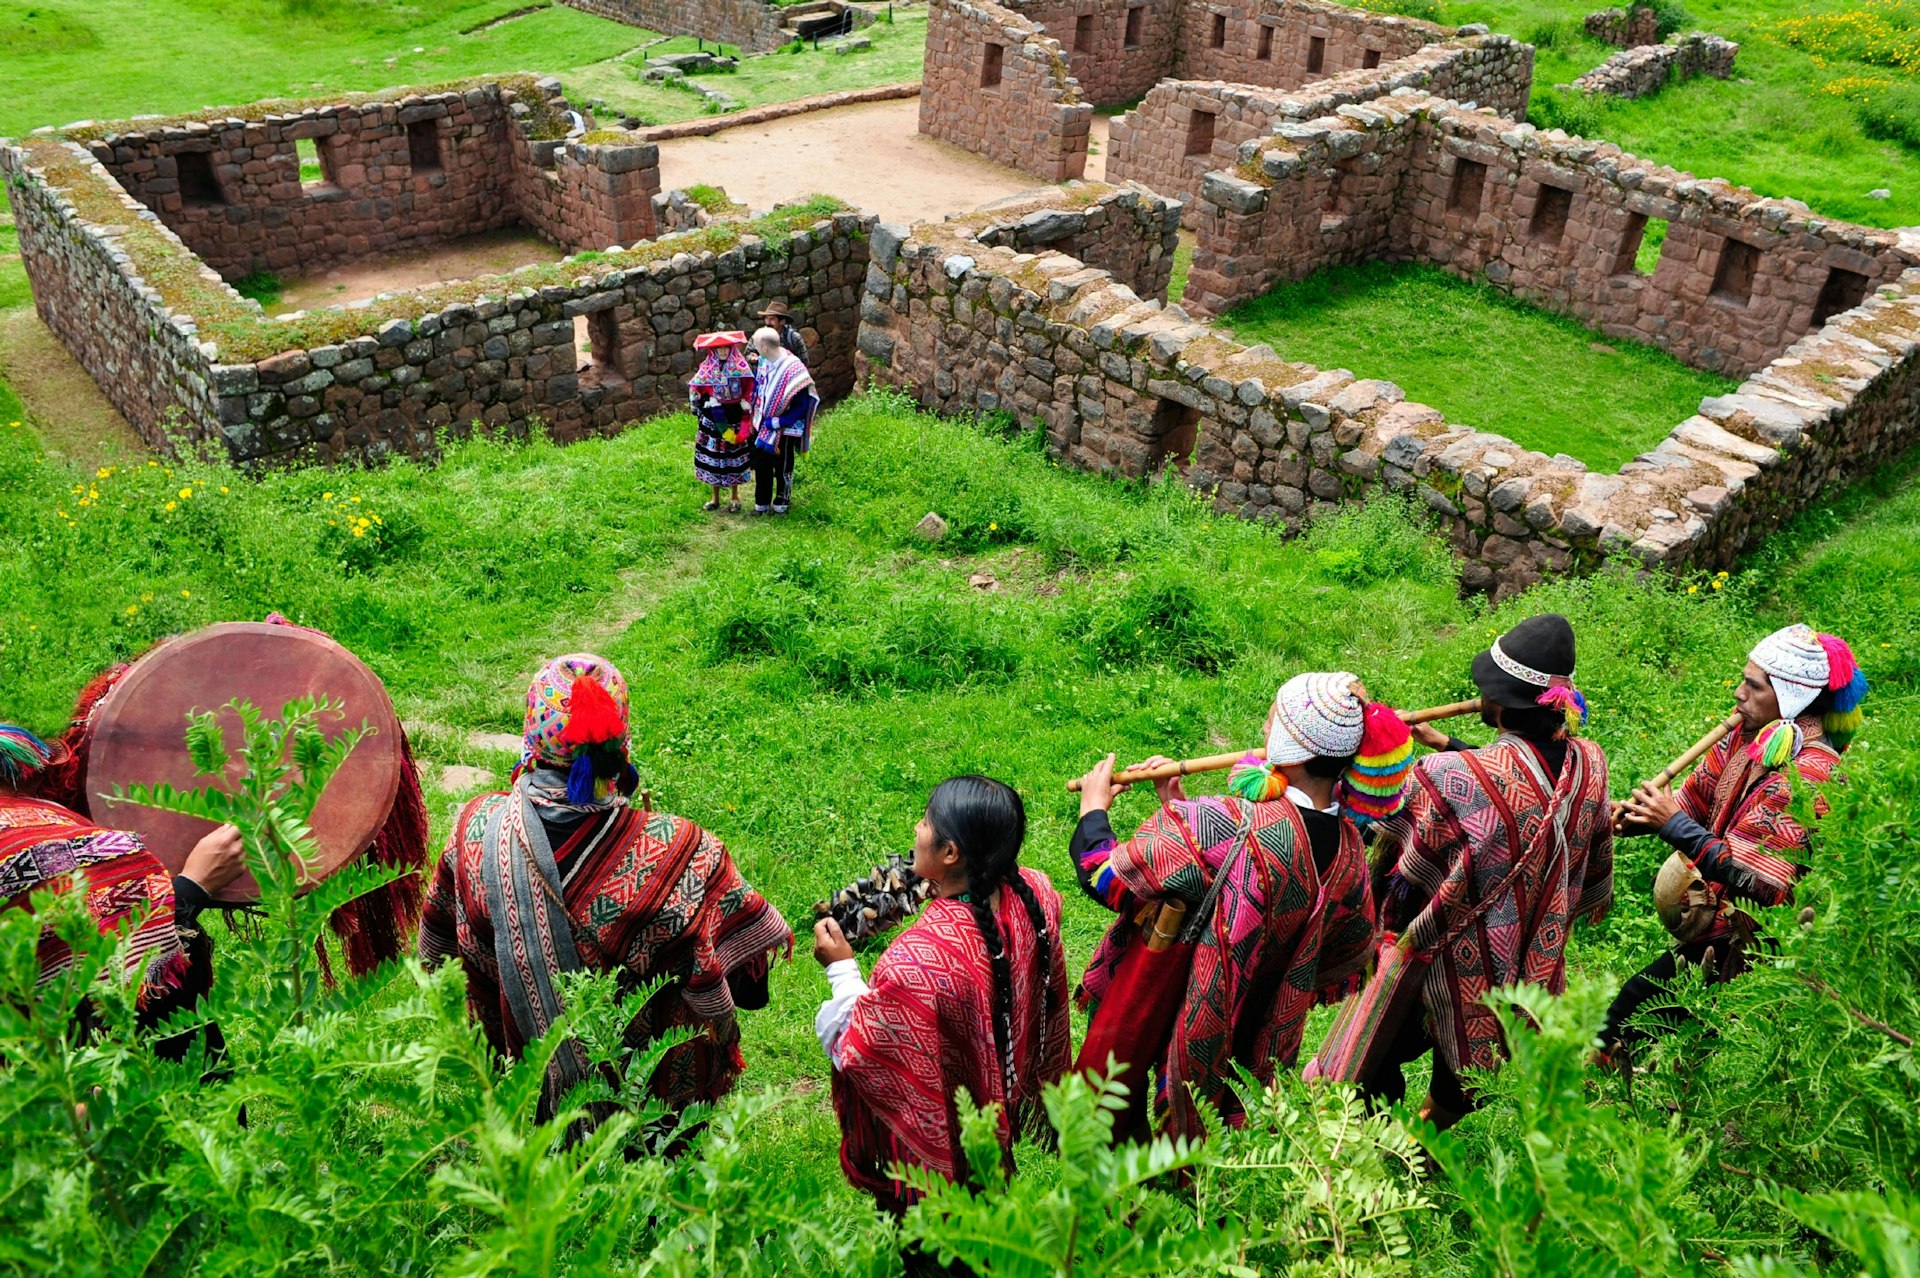 Traditional peruvian wedding ceremony at the Temple of Water ruins in Sacred Valley near Cuzco